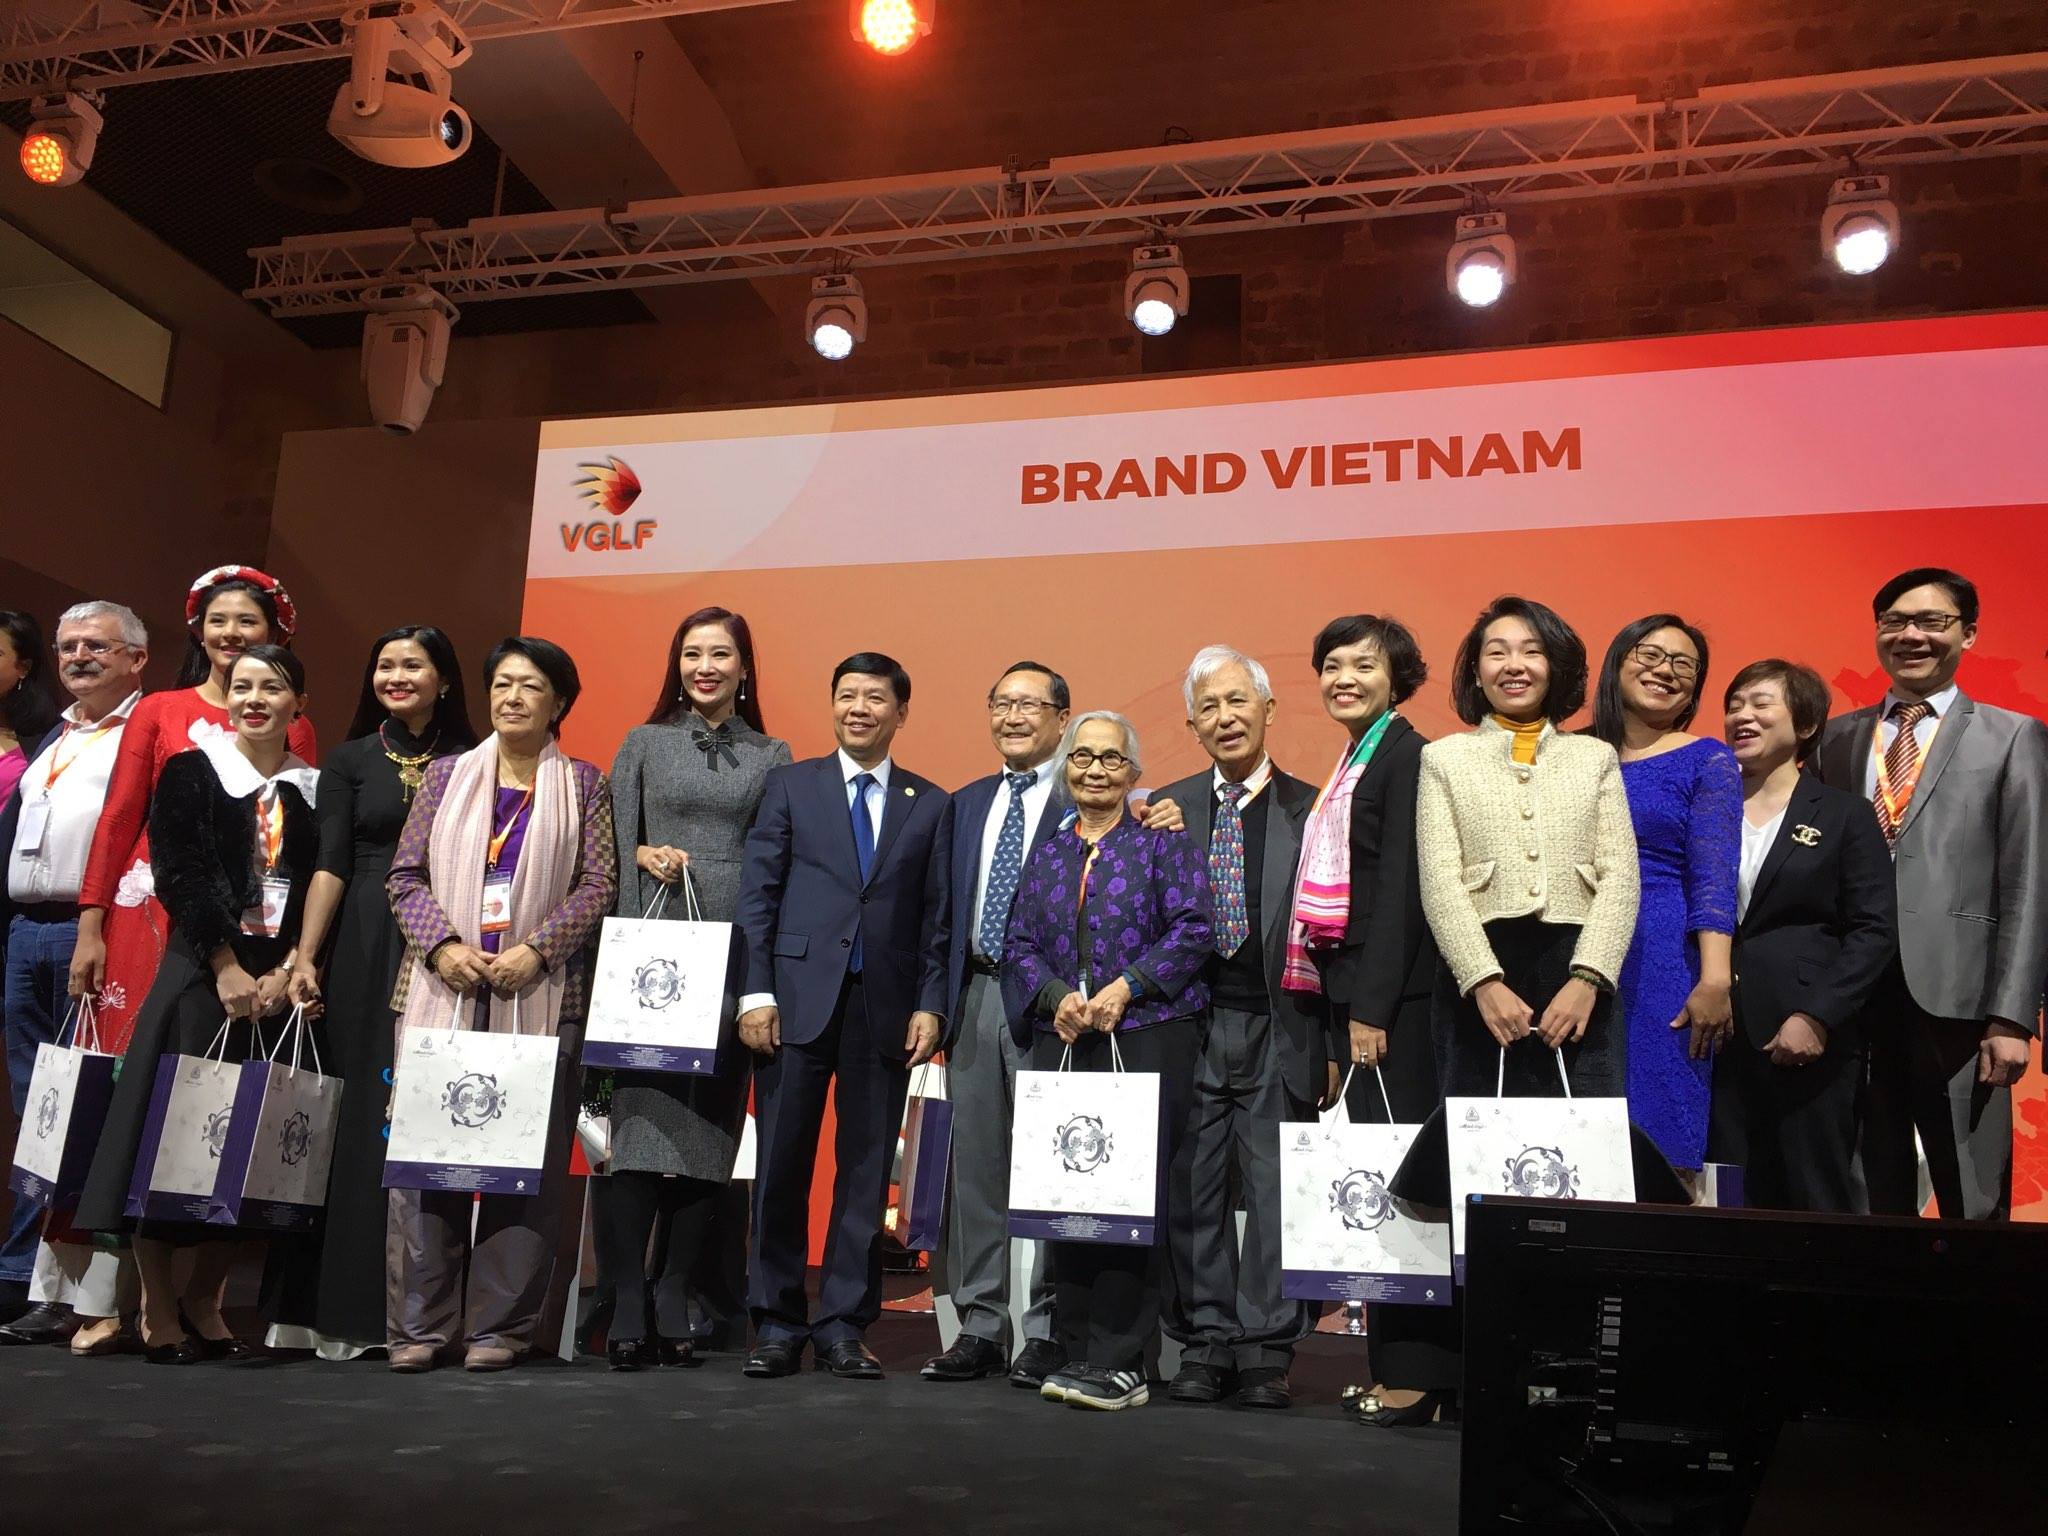 Network of Vietnamese worldwide can contribute to country’s development: forum